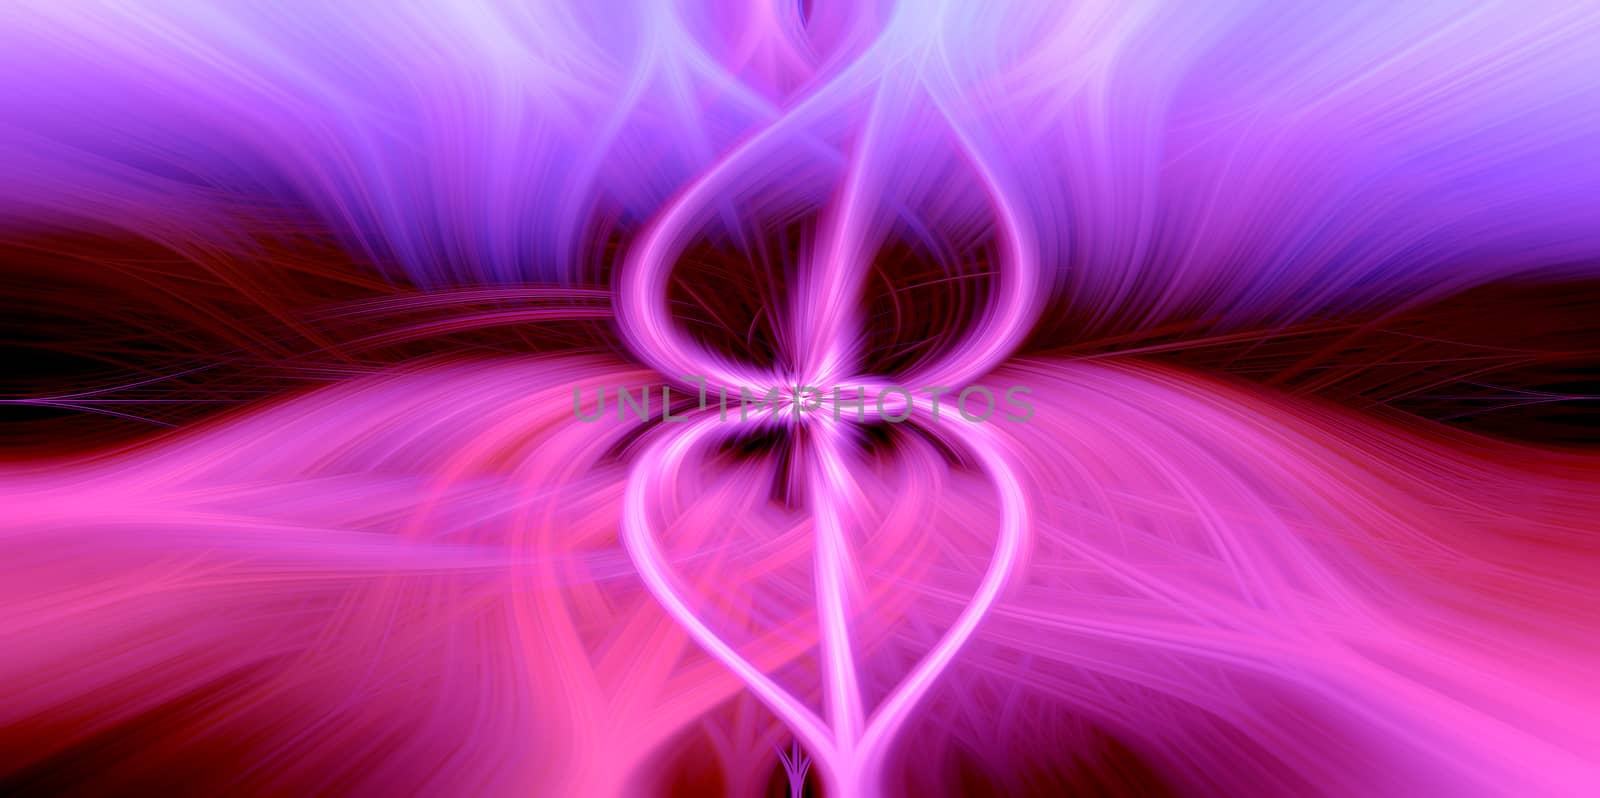 Beautiful abstract intertwined 3d fibers forming an ornament out of various symmetrical shapes. Two tied hearts in the middle. Purple, pink, and blue colors. Illustration.